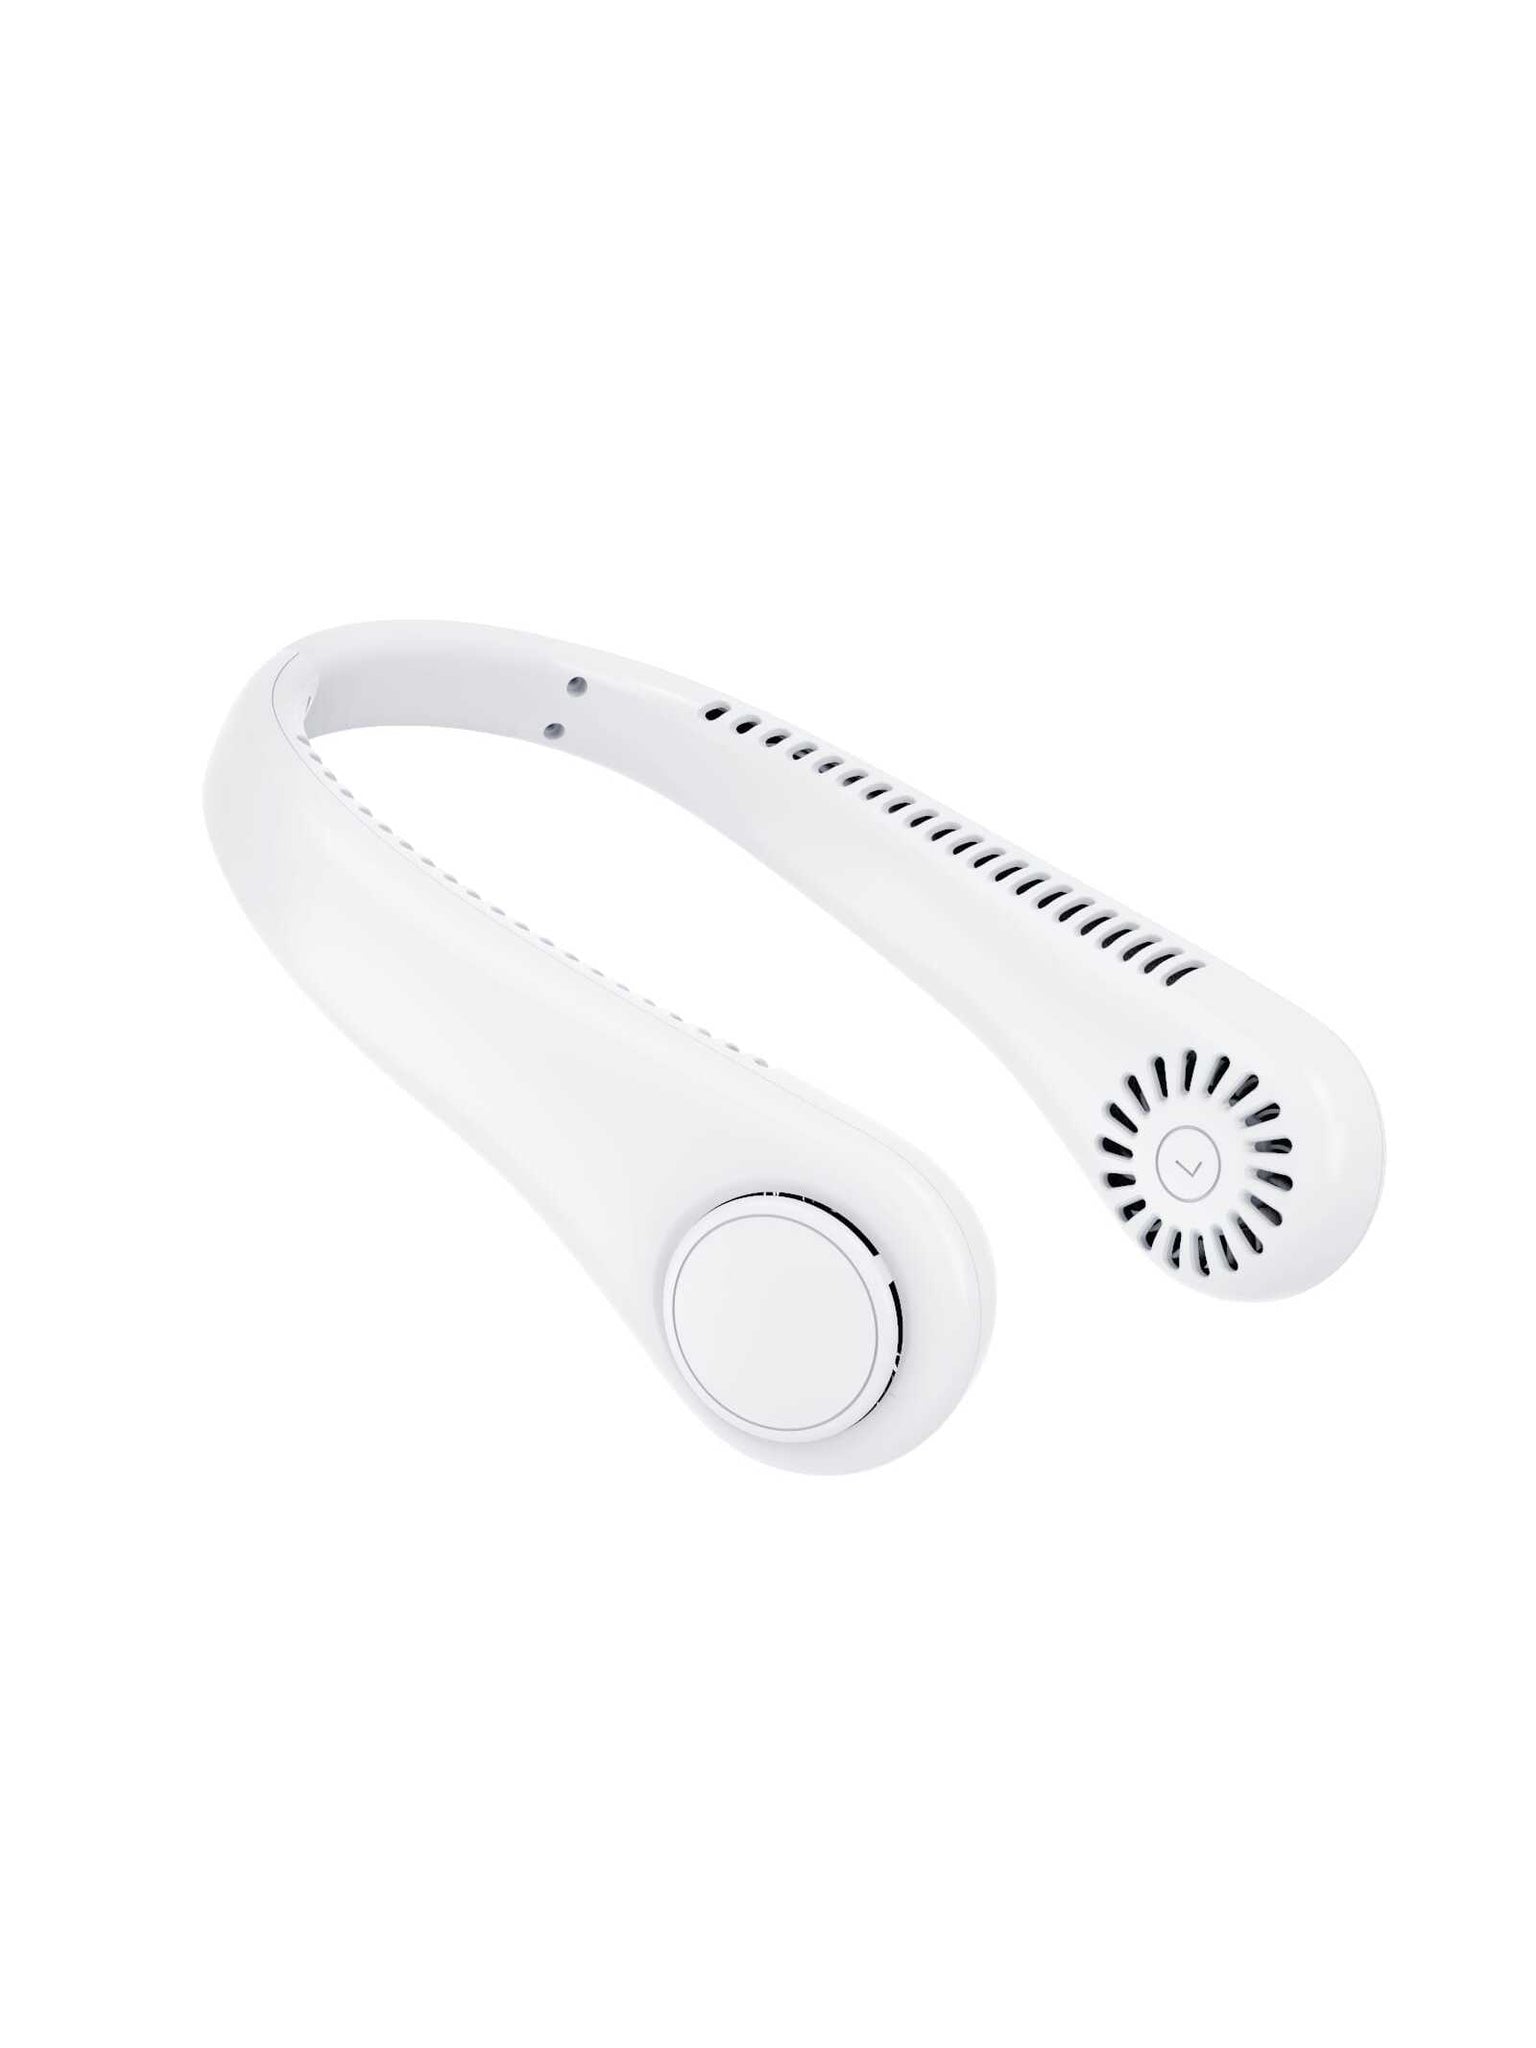 1pc Lazy Neck Hanging Fan, Noiseless Bladeless Fan, Adjustable Silicone Strap, Suitable For Summer Use-White-6